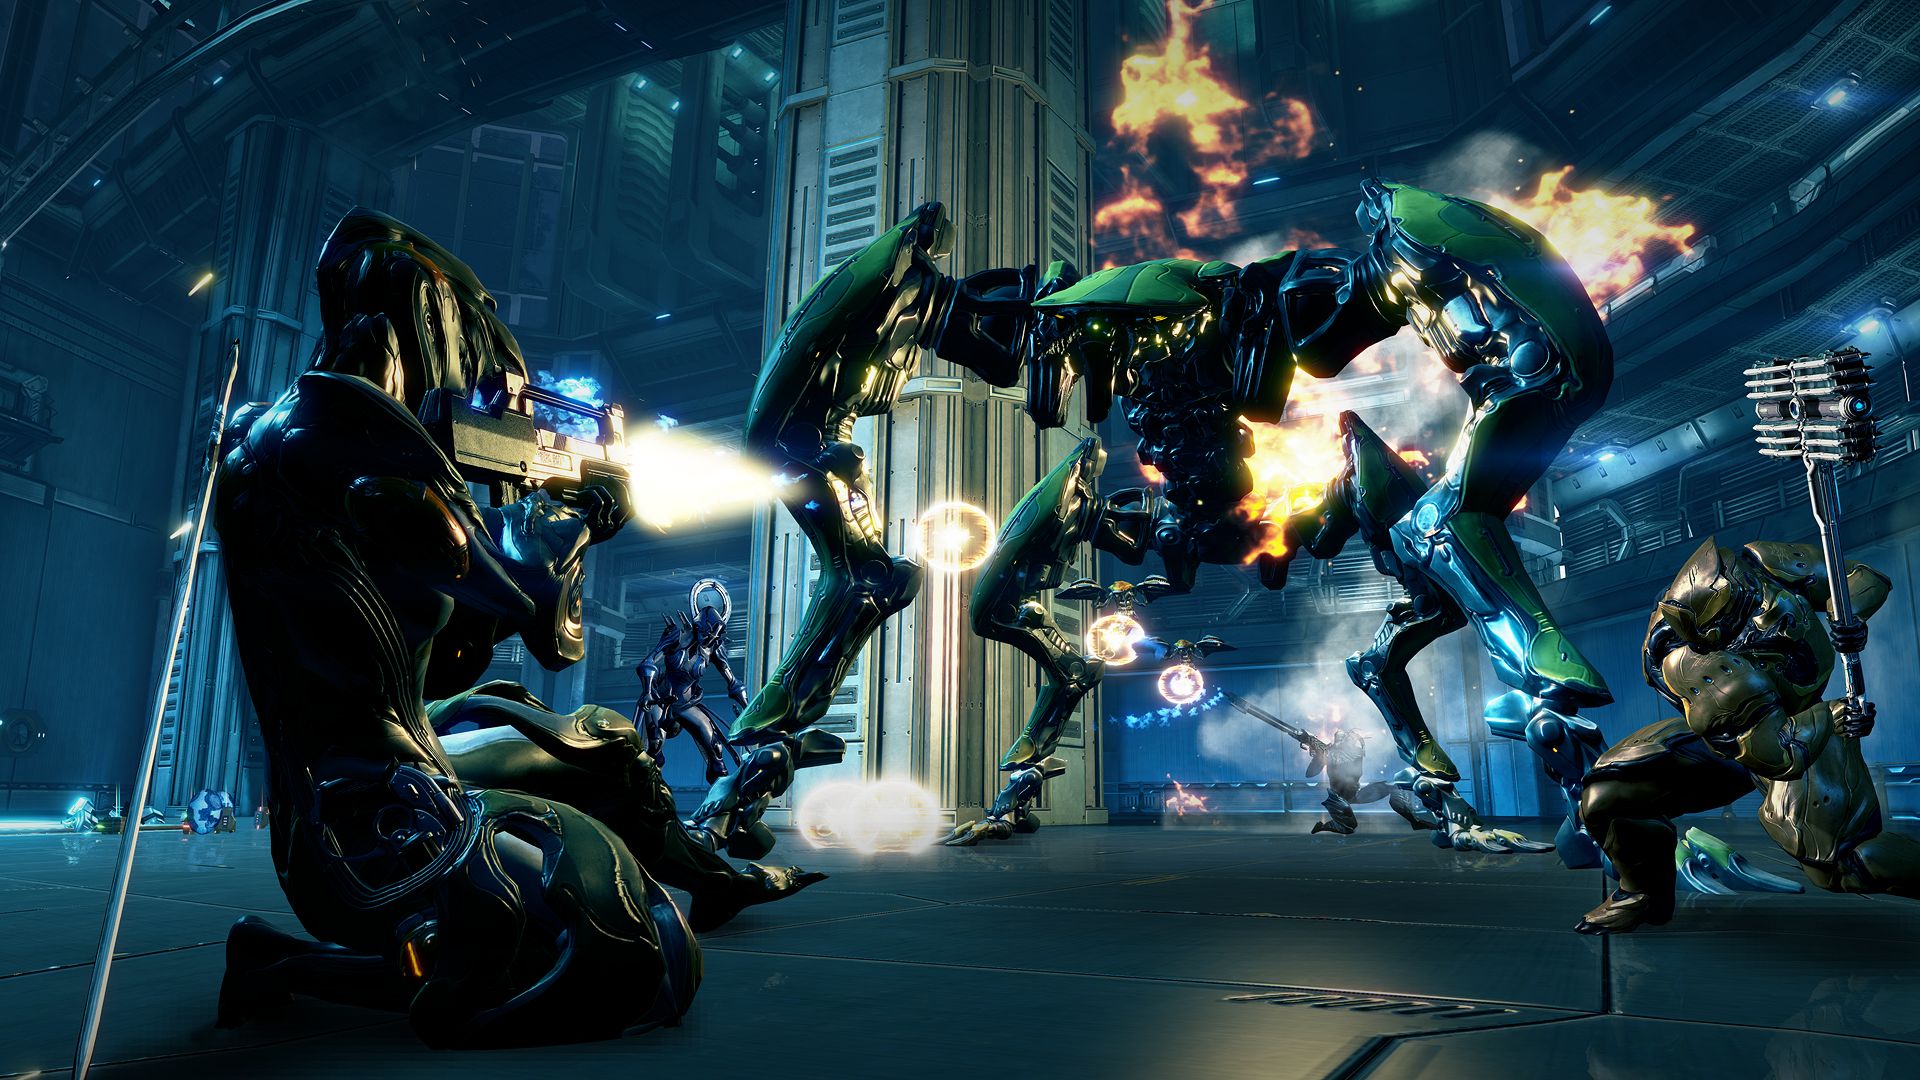 Players working together to take down a giant robot in Warframe